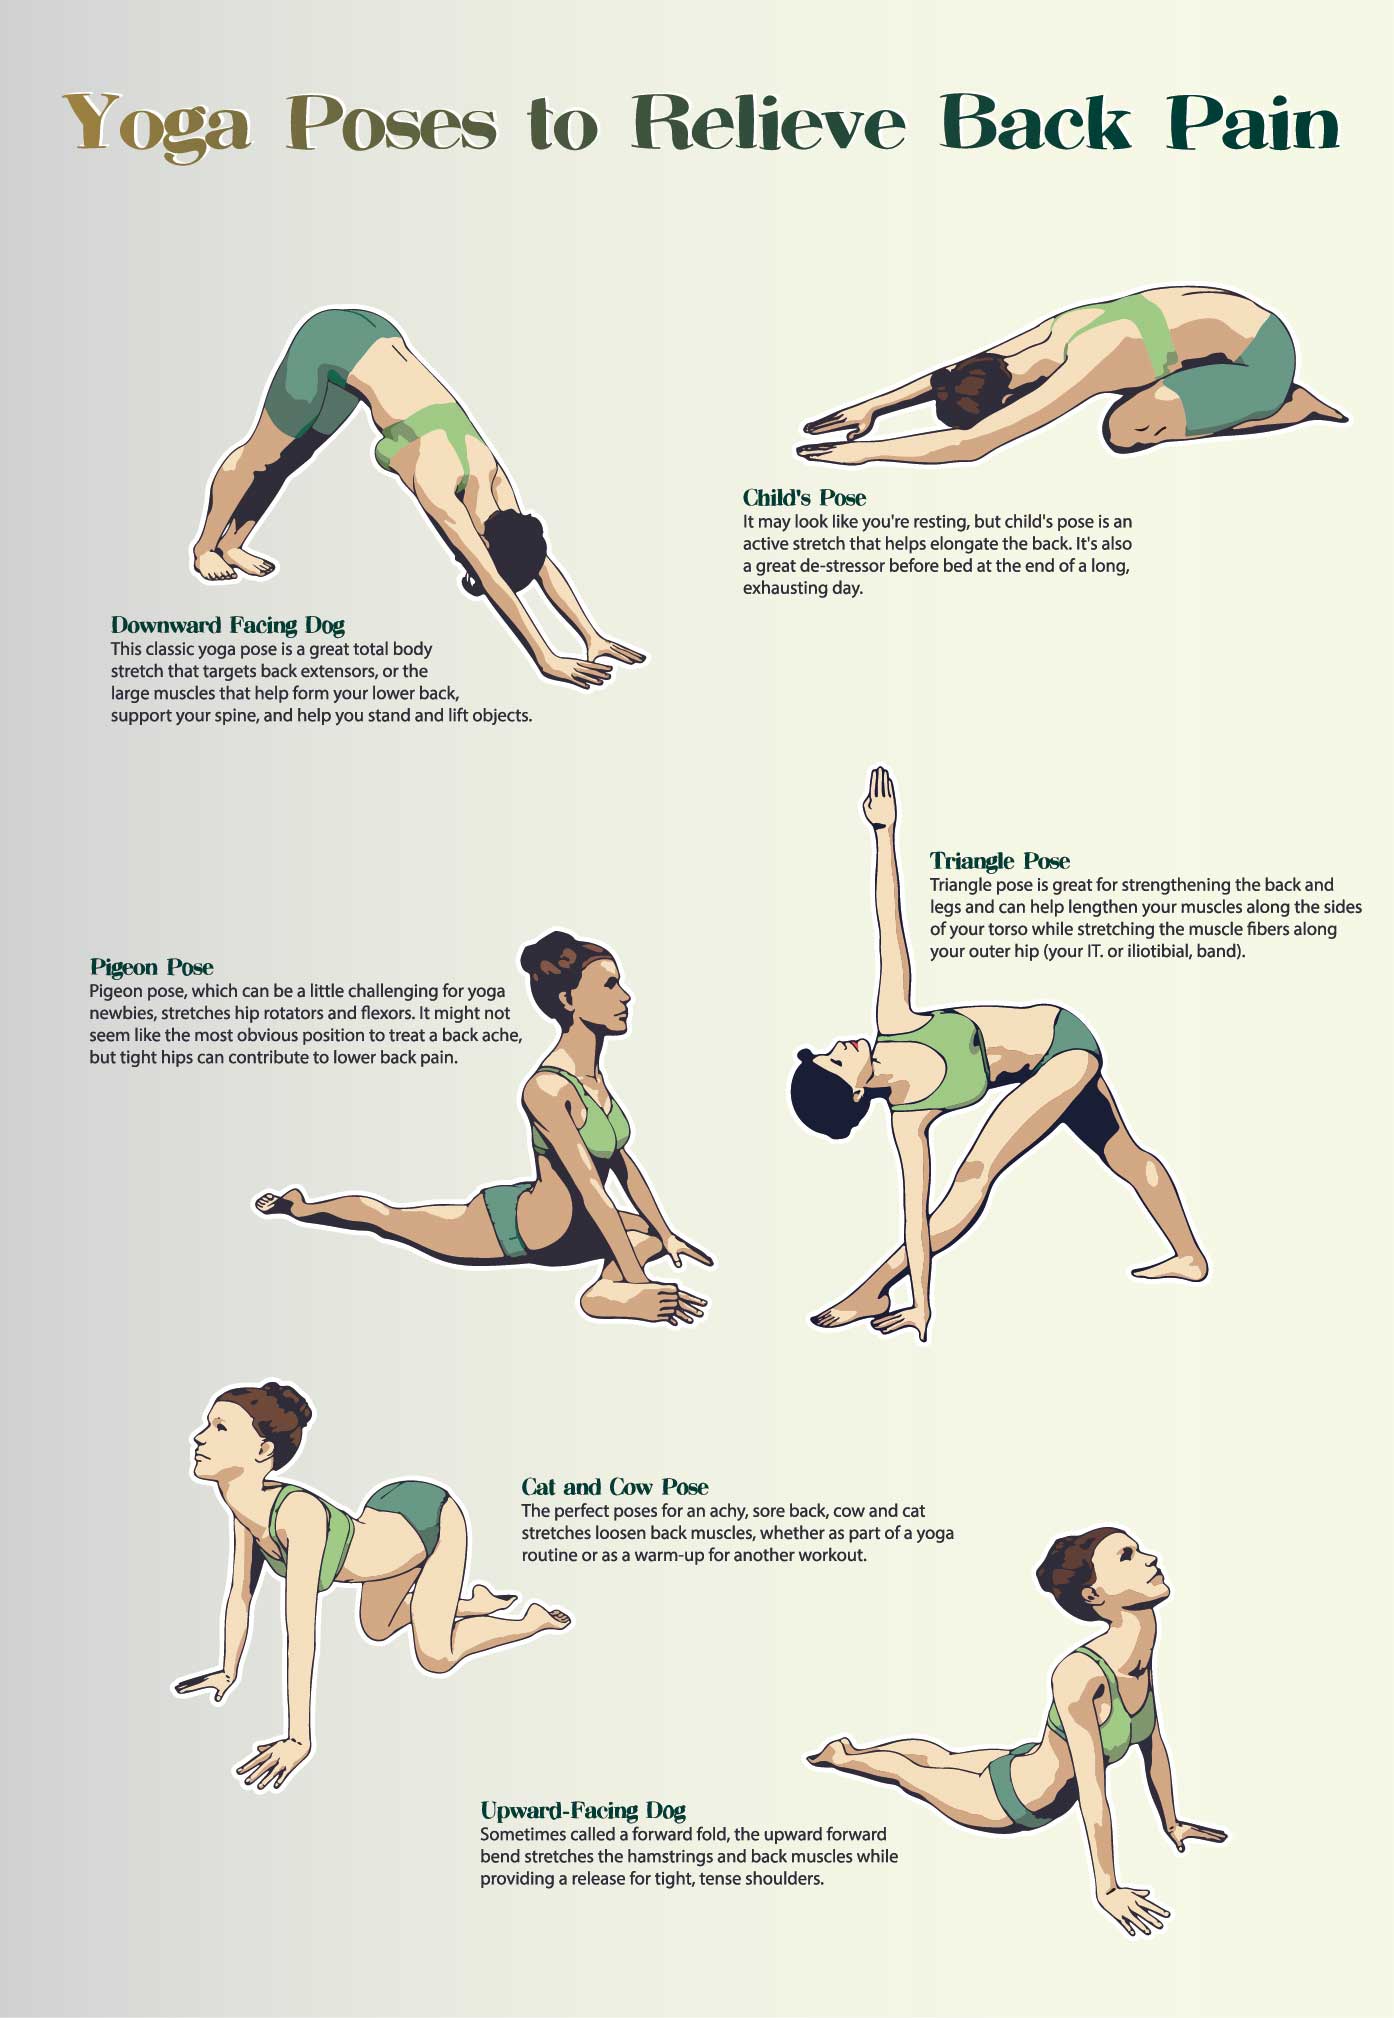 Stretching and exercises for back pain